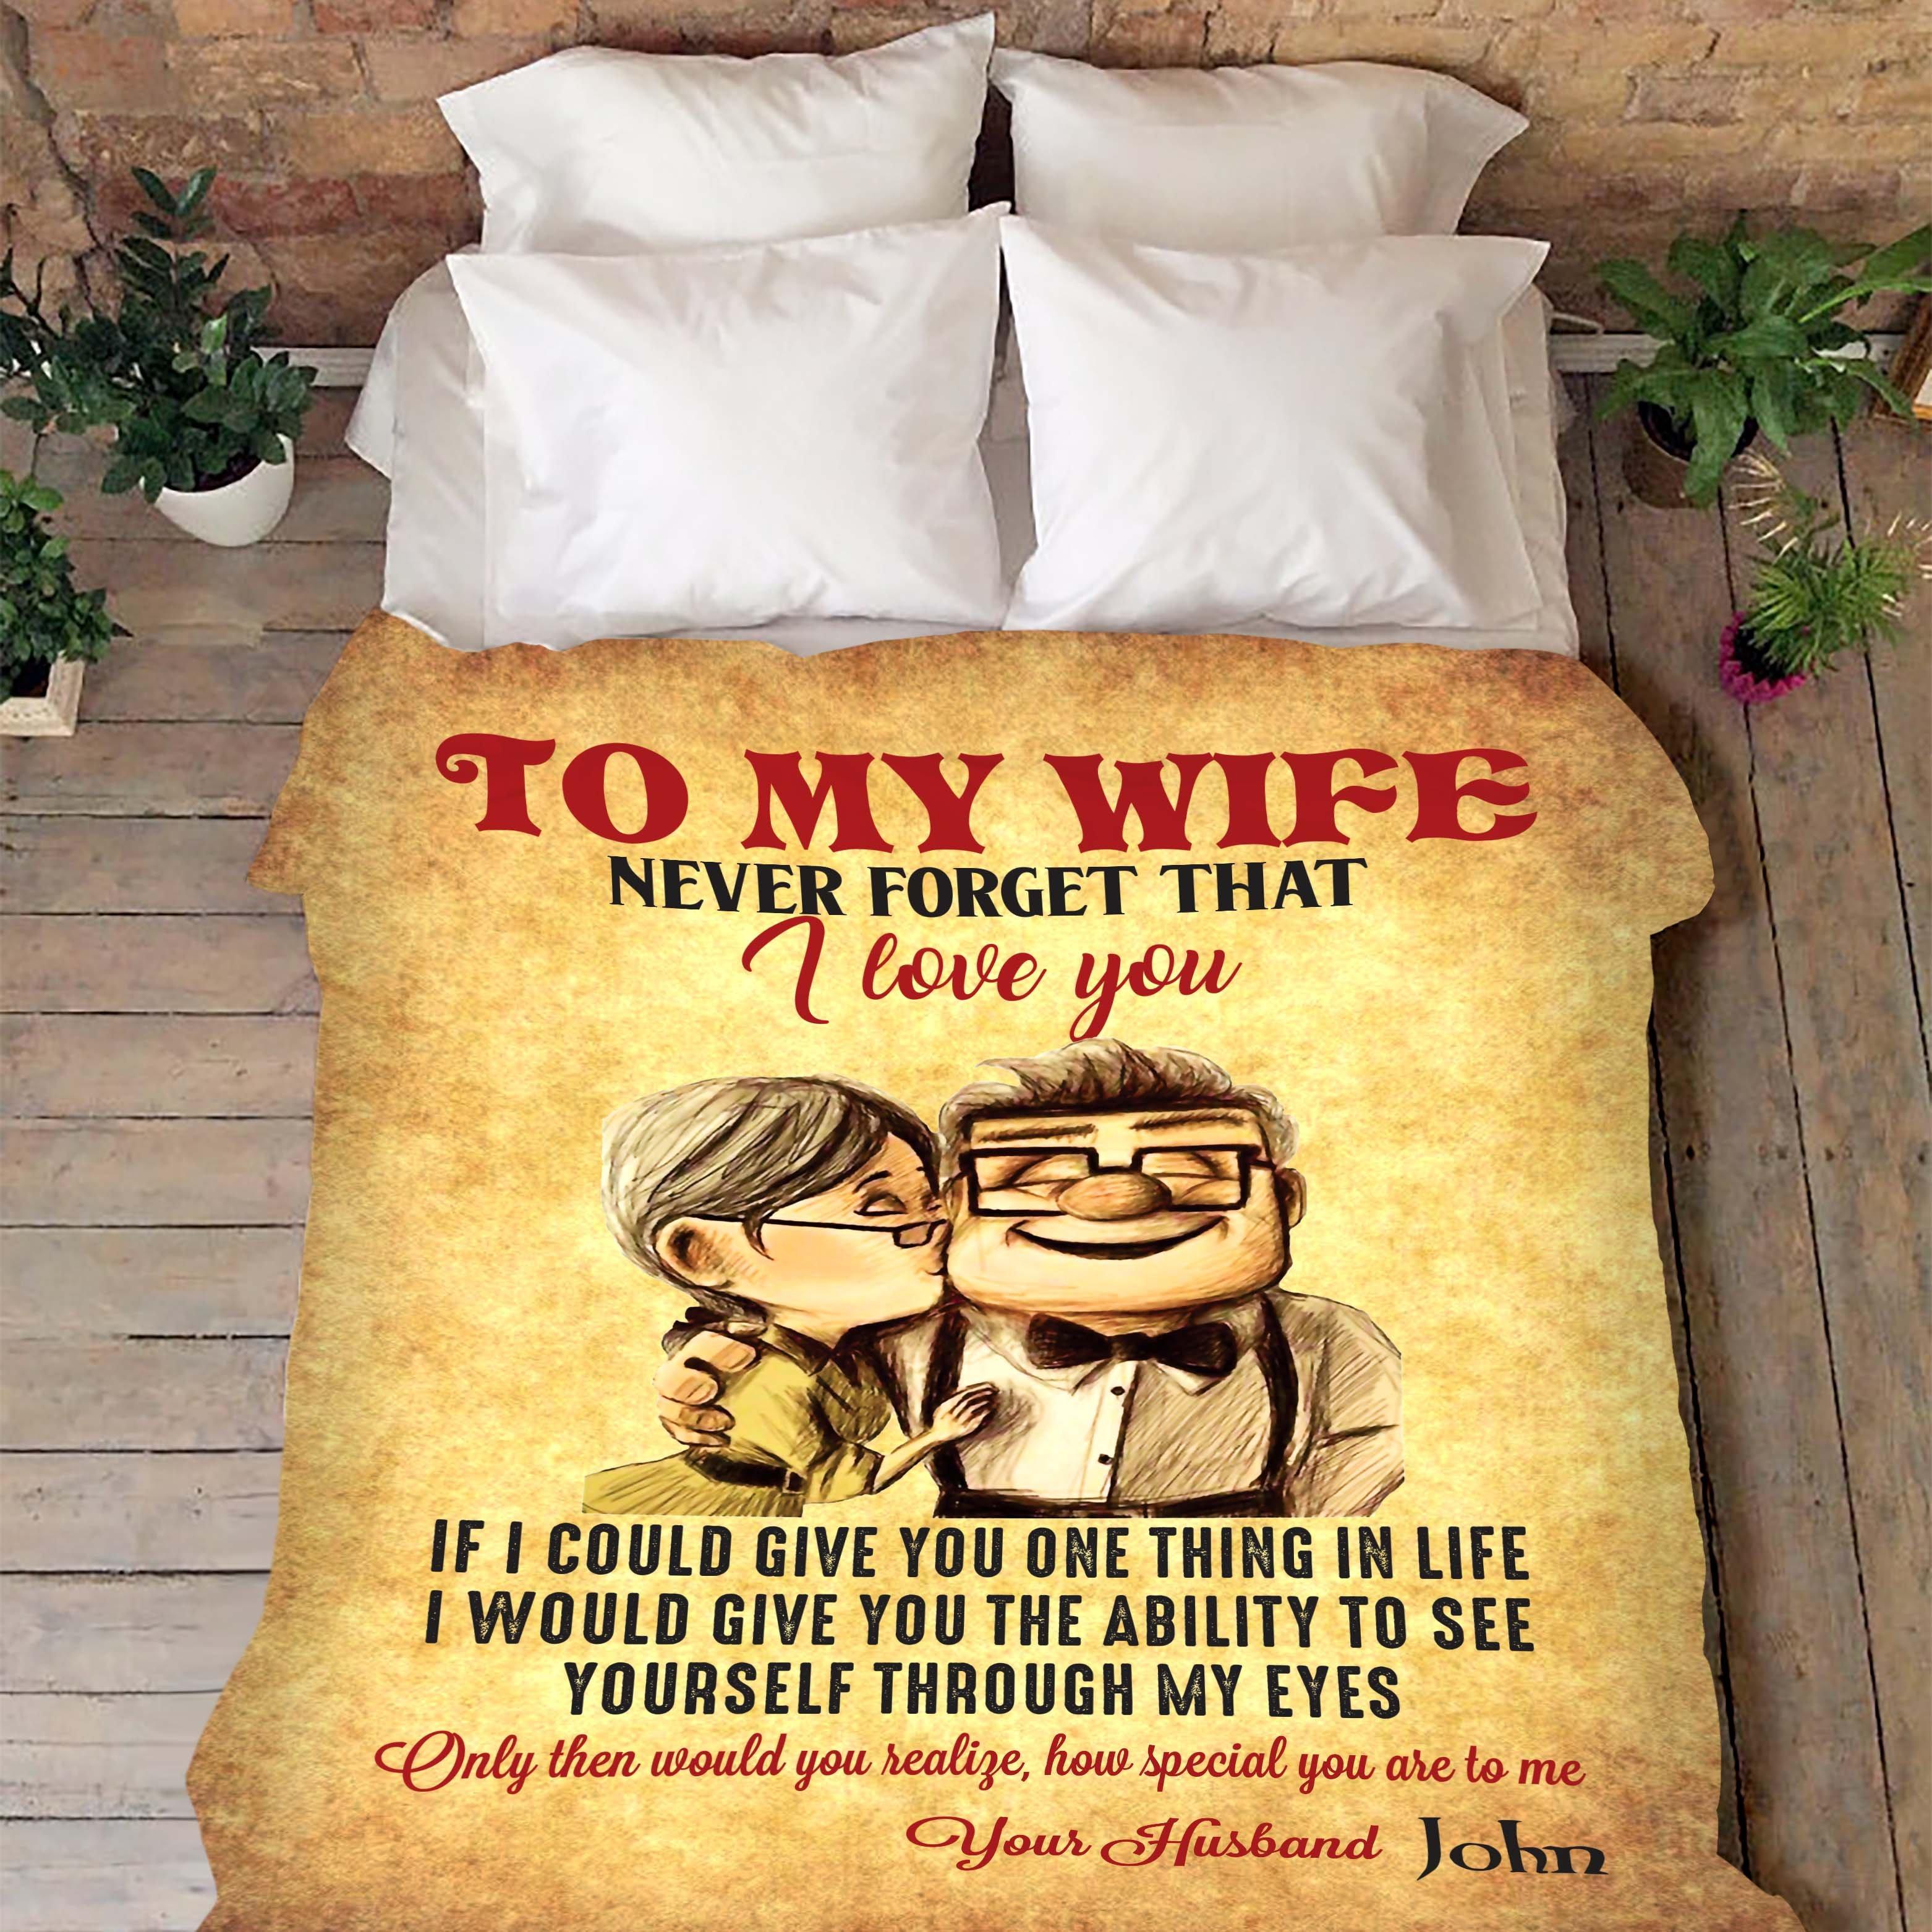 Up movie to my wife never forget that I love you blanket - size 50x60